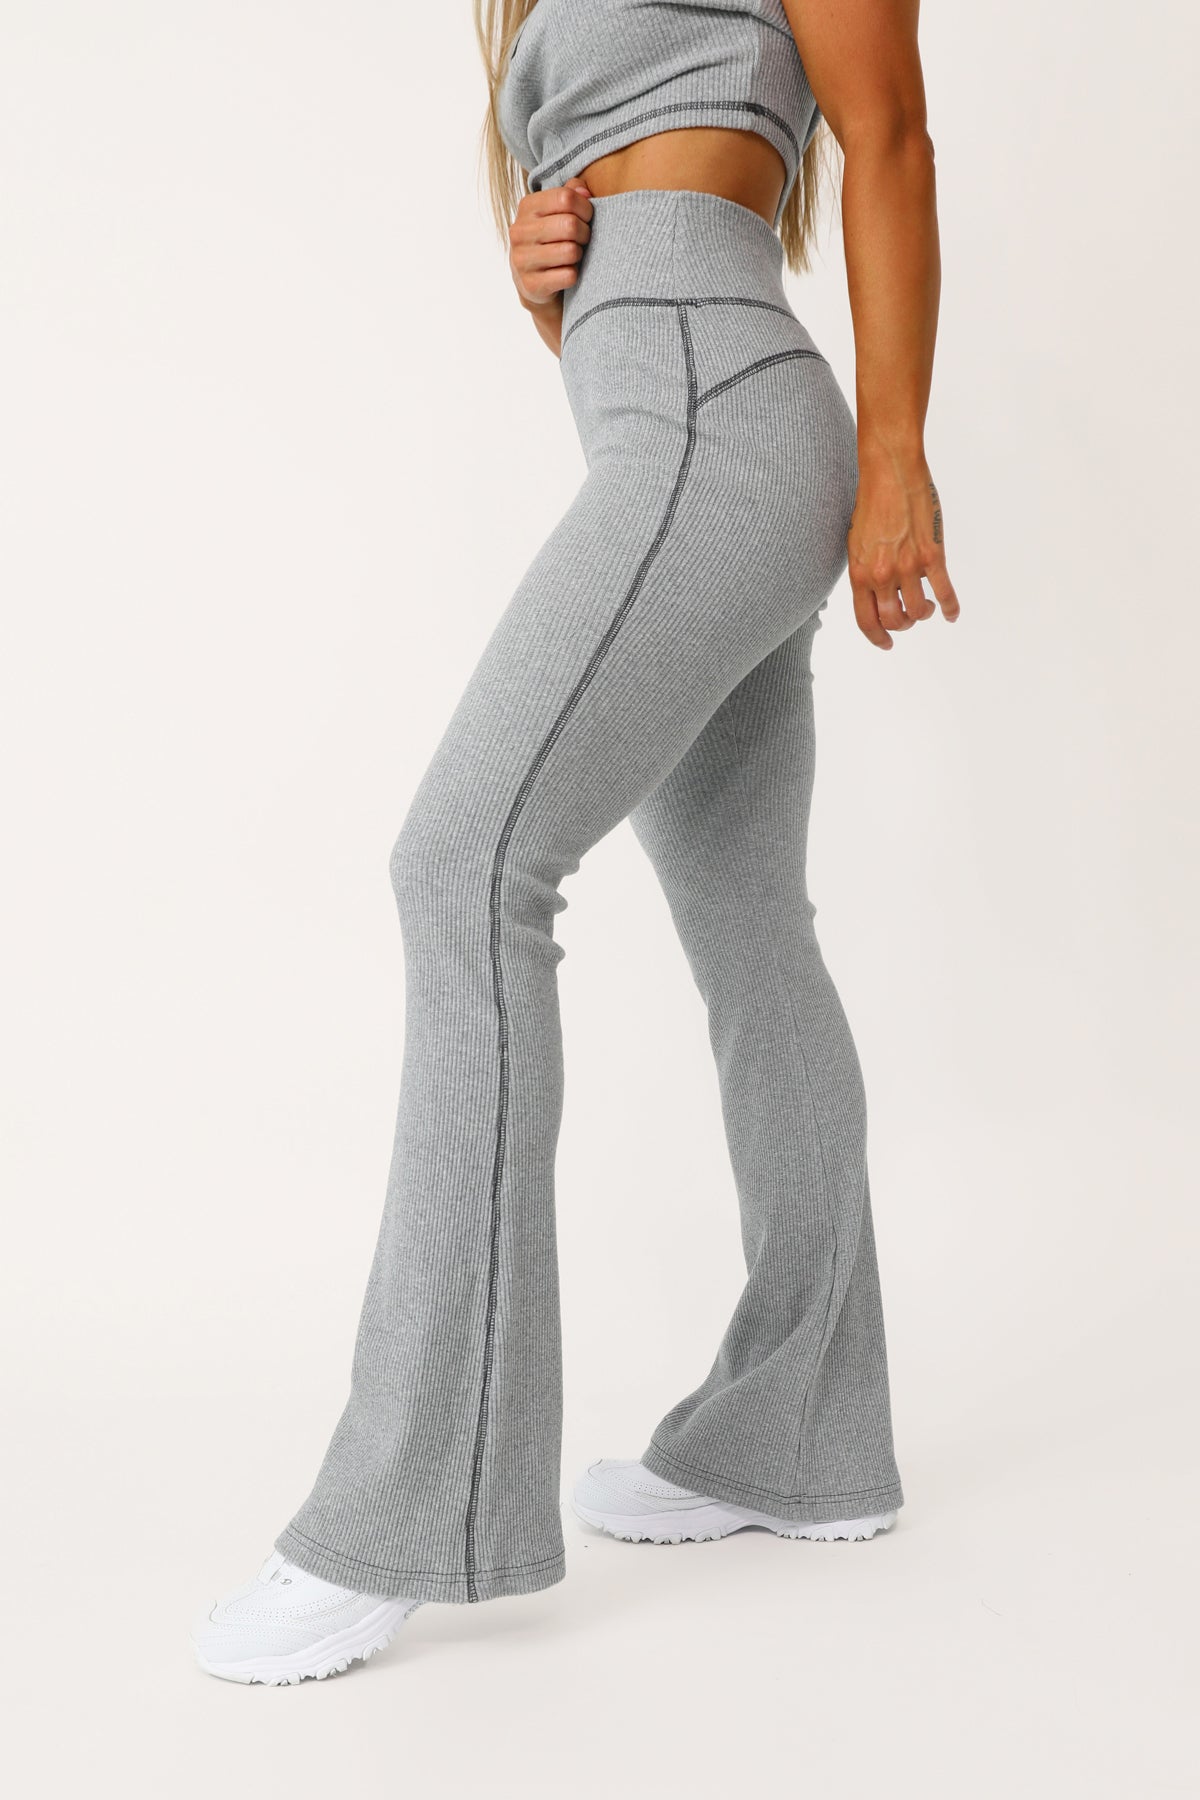 Charcoal High Rise Flare Yoga Pants - Size Small Avail. – Harp & Sole  Boutique